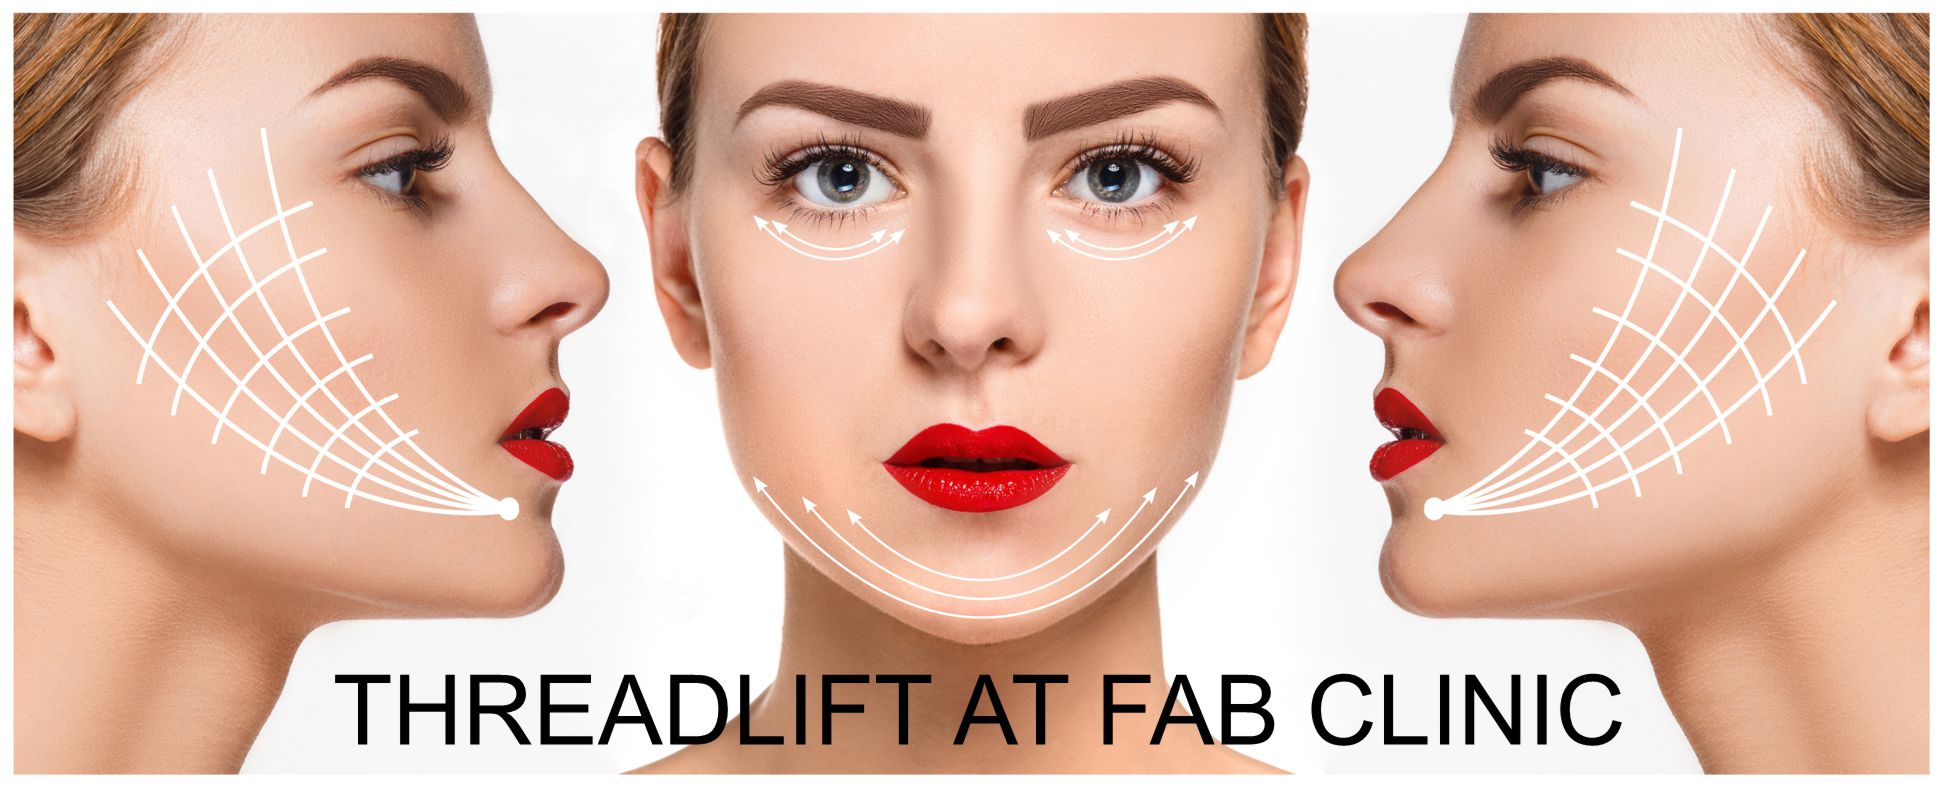 The young female face with clean fresh skin, antiaging and thread lifting concept